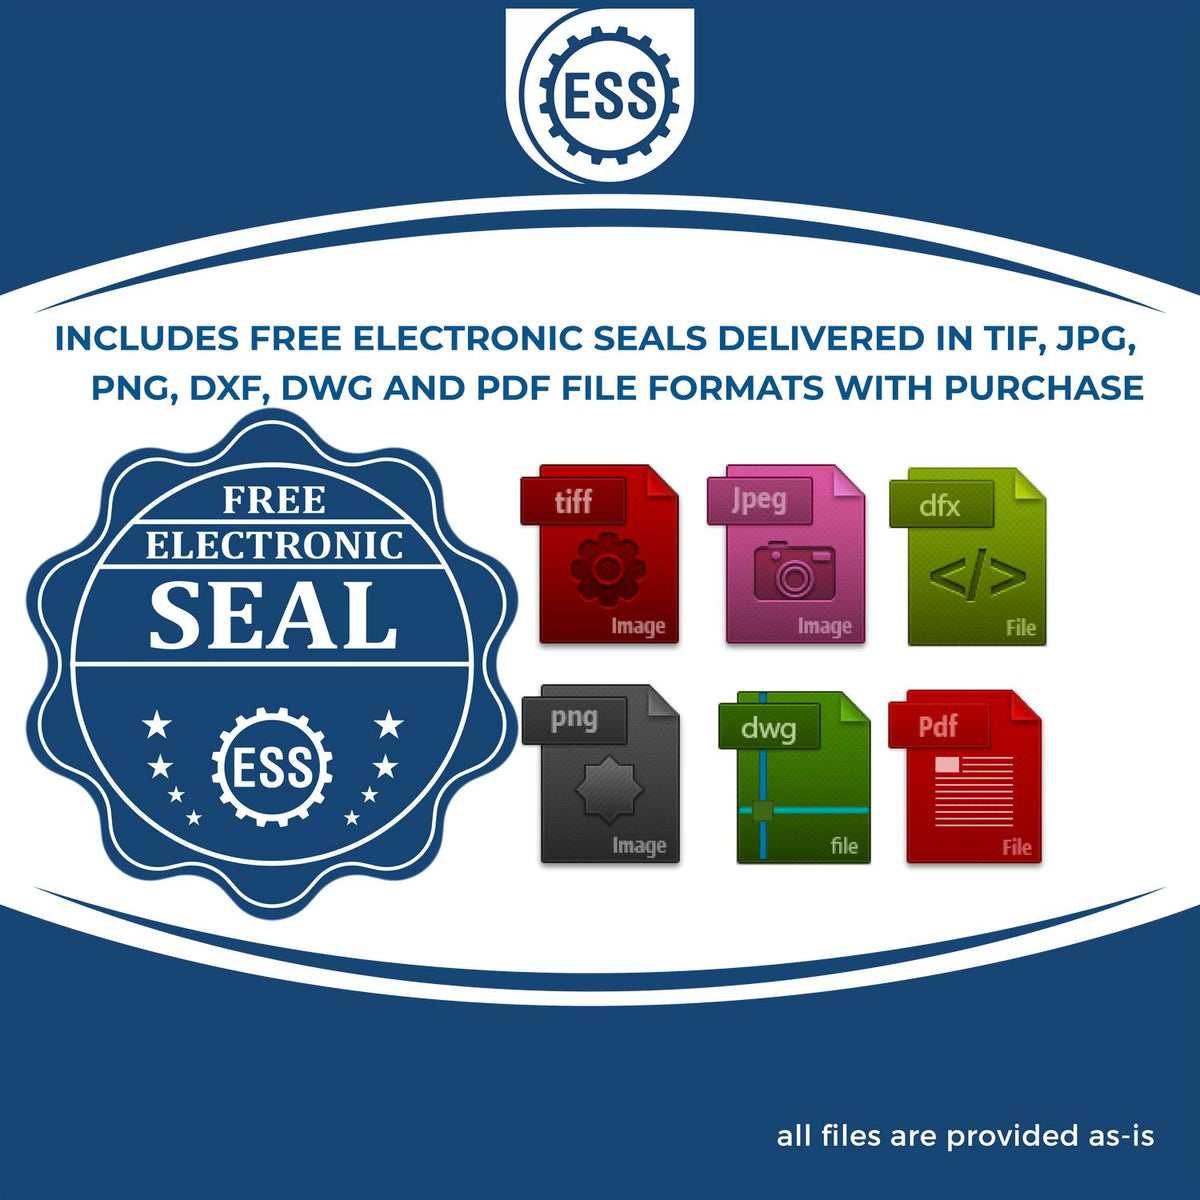 An infographic for the free electronic seal for the State of Utah Long Reach Architectural Embossing Seal illustrating the different file type icons such as DXF, DWG, TIF, JPG and PNG.